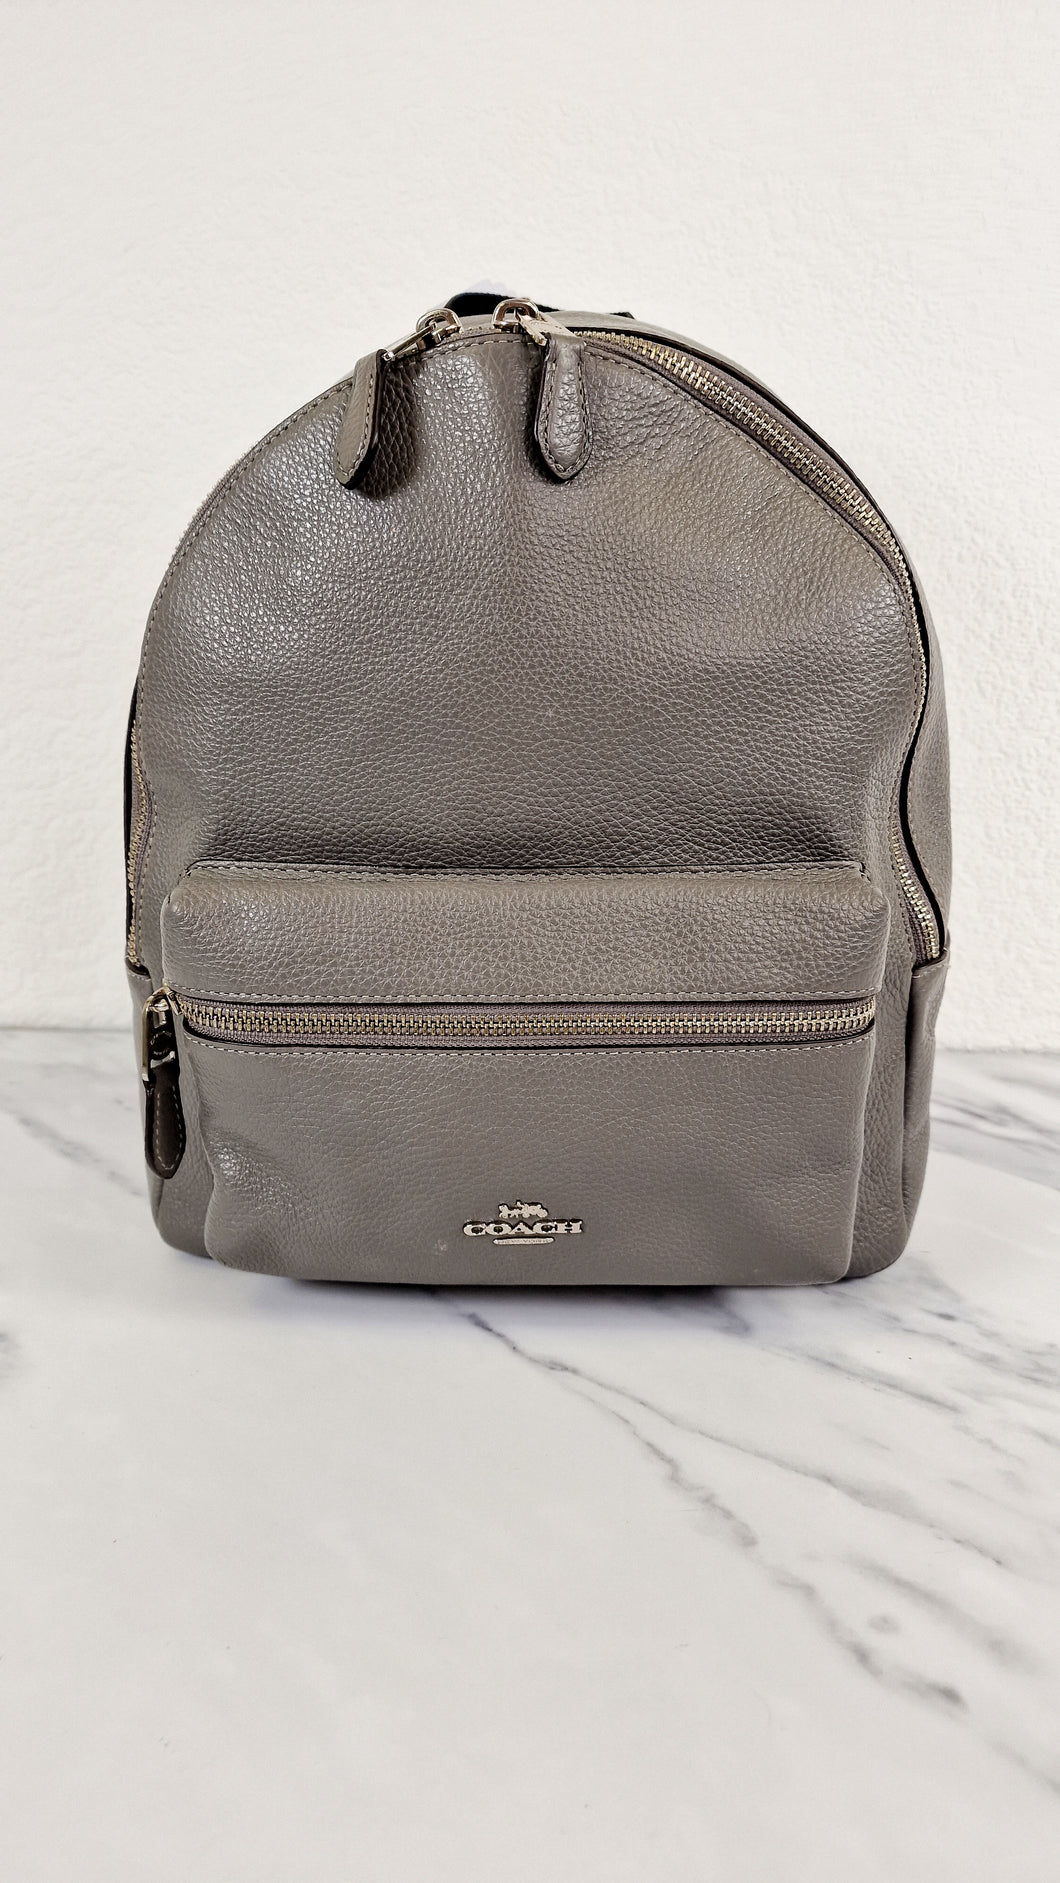 Coach Medium Charlie Backpack in Grey Pebble Leather - Coach F30550